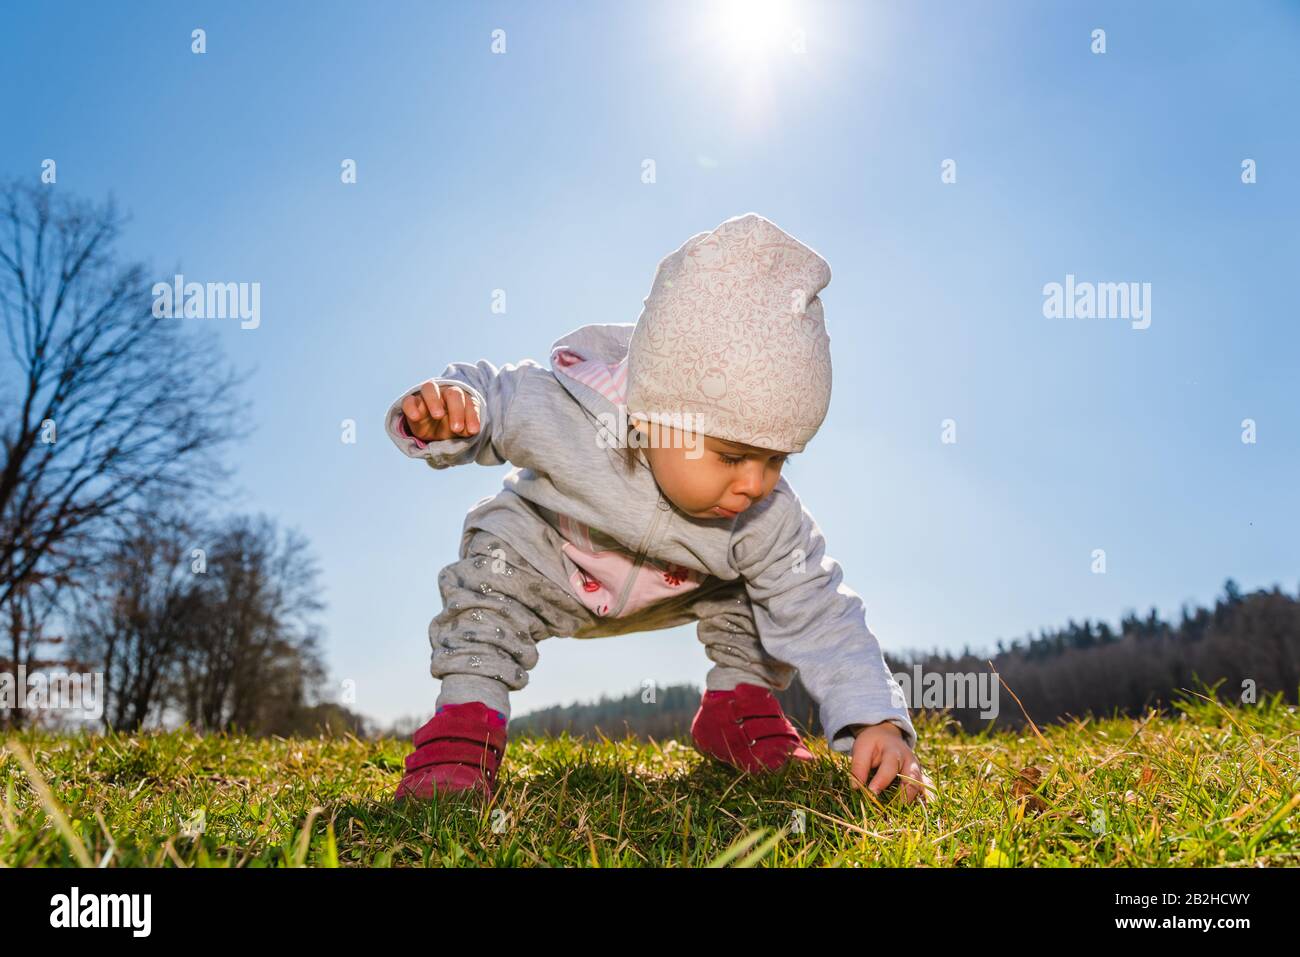 Baby wearing warm beanie hat, sweatshirt and red boots outdoors in rural area discovering nature in spring, sunny day. Stock Photo